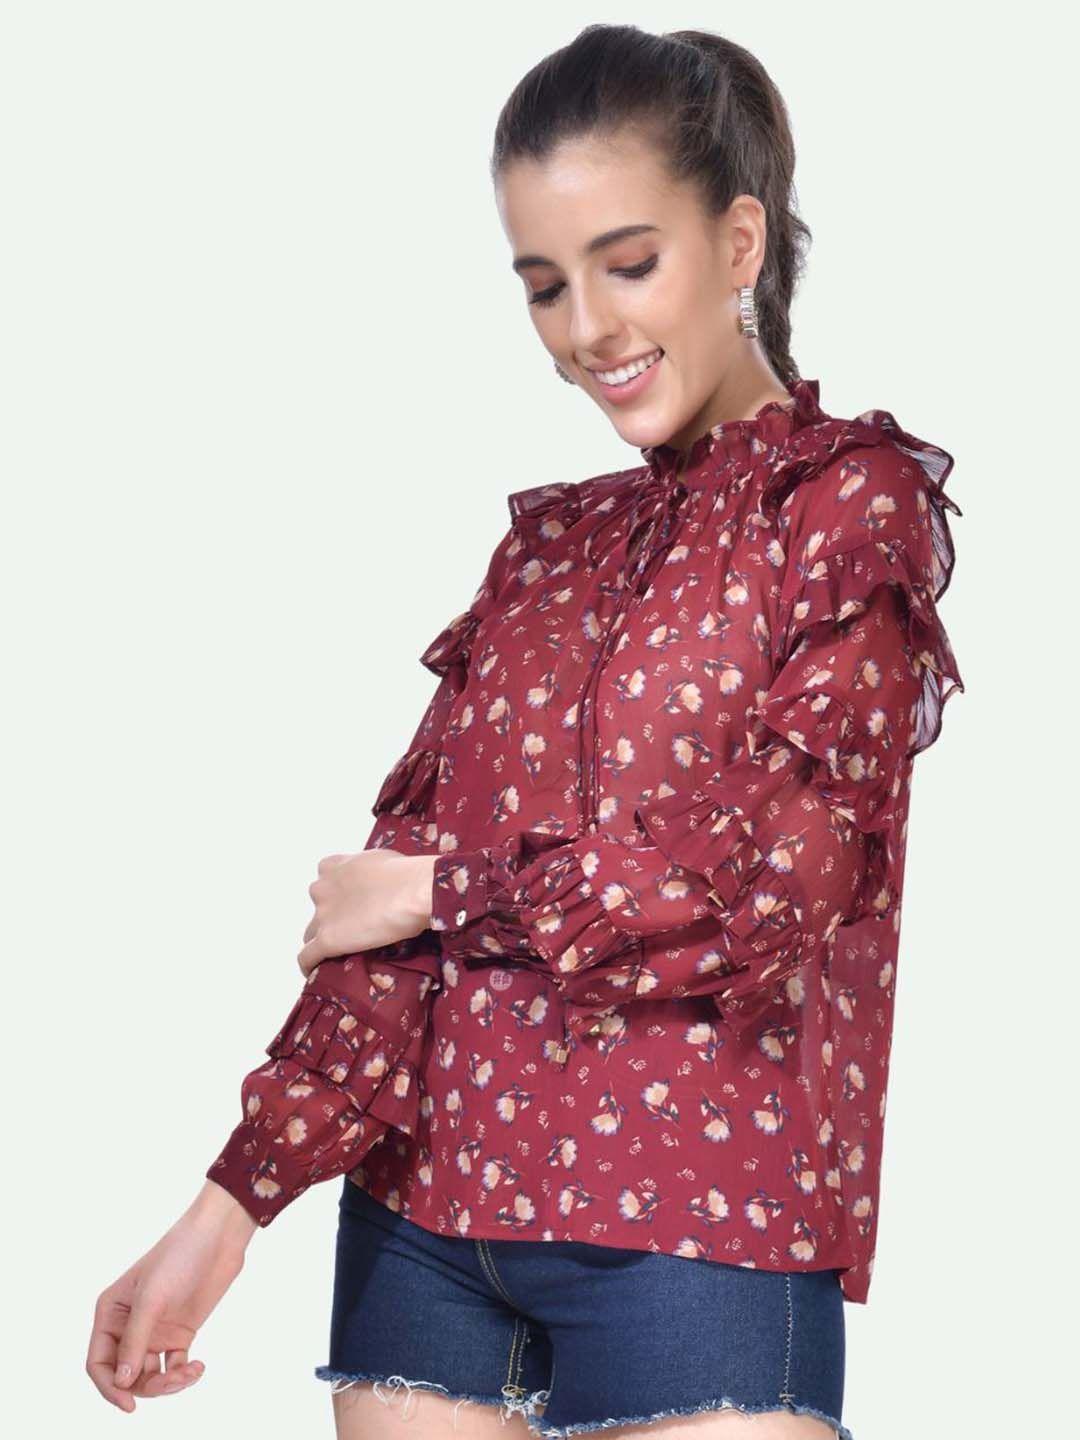 beatnik floral printed tie-up neck shirt style top